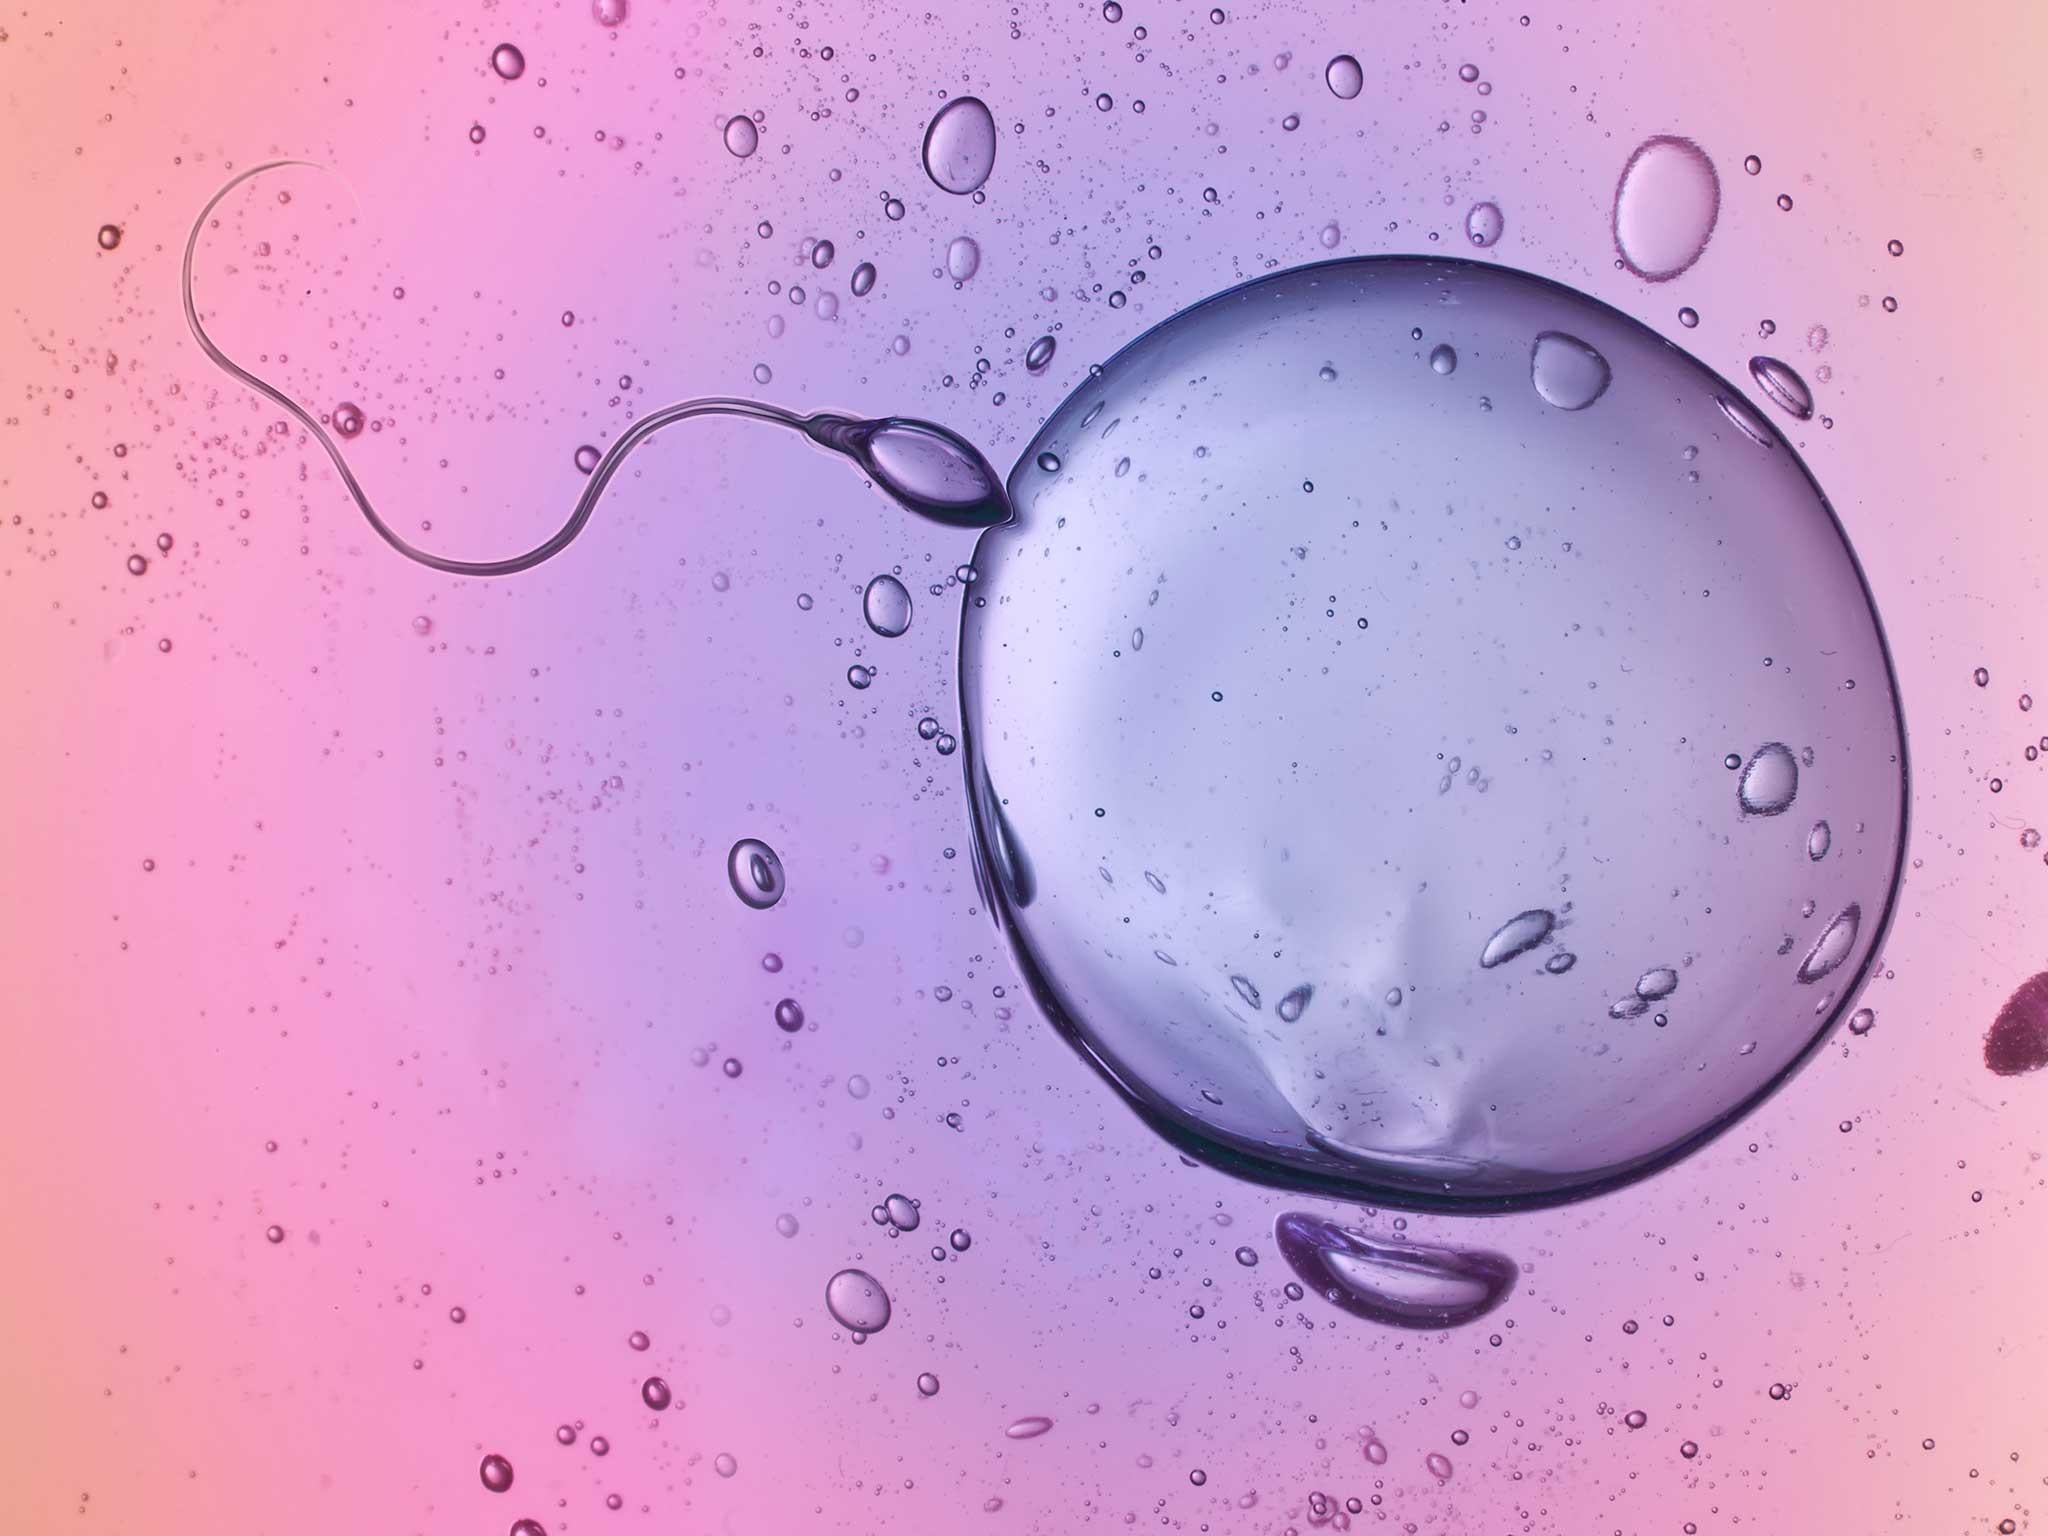 Latest research uses a peptide which alters the way human cells work, “switching off” sperm’s ability to swim